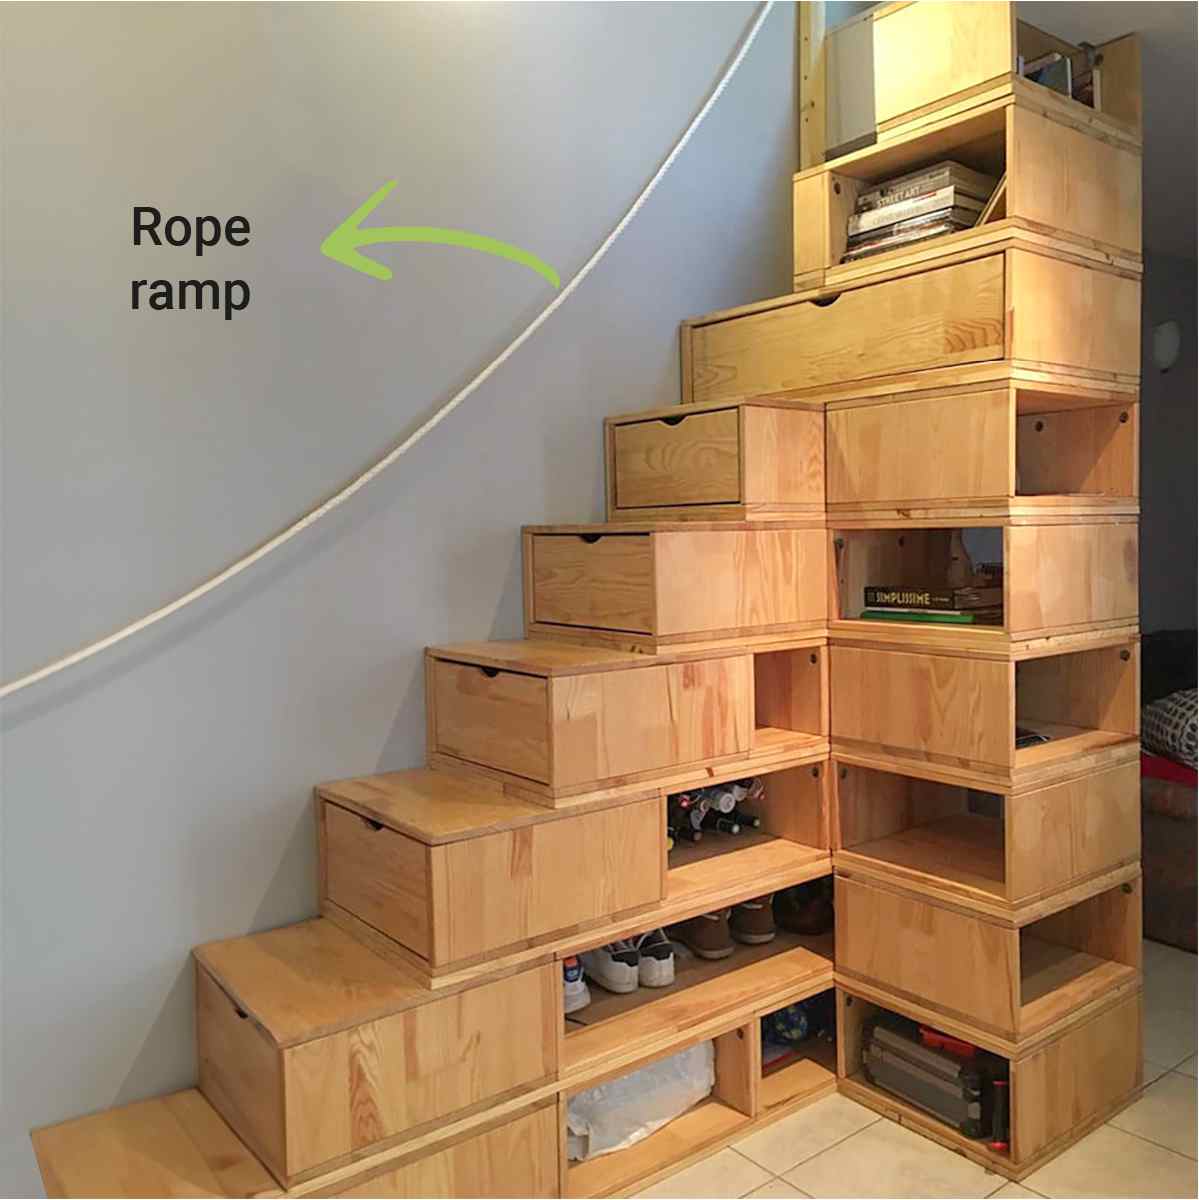 Cube staircase with rope handrail